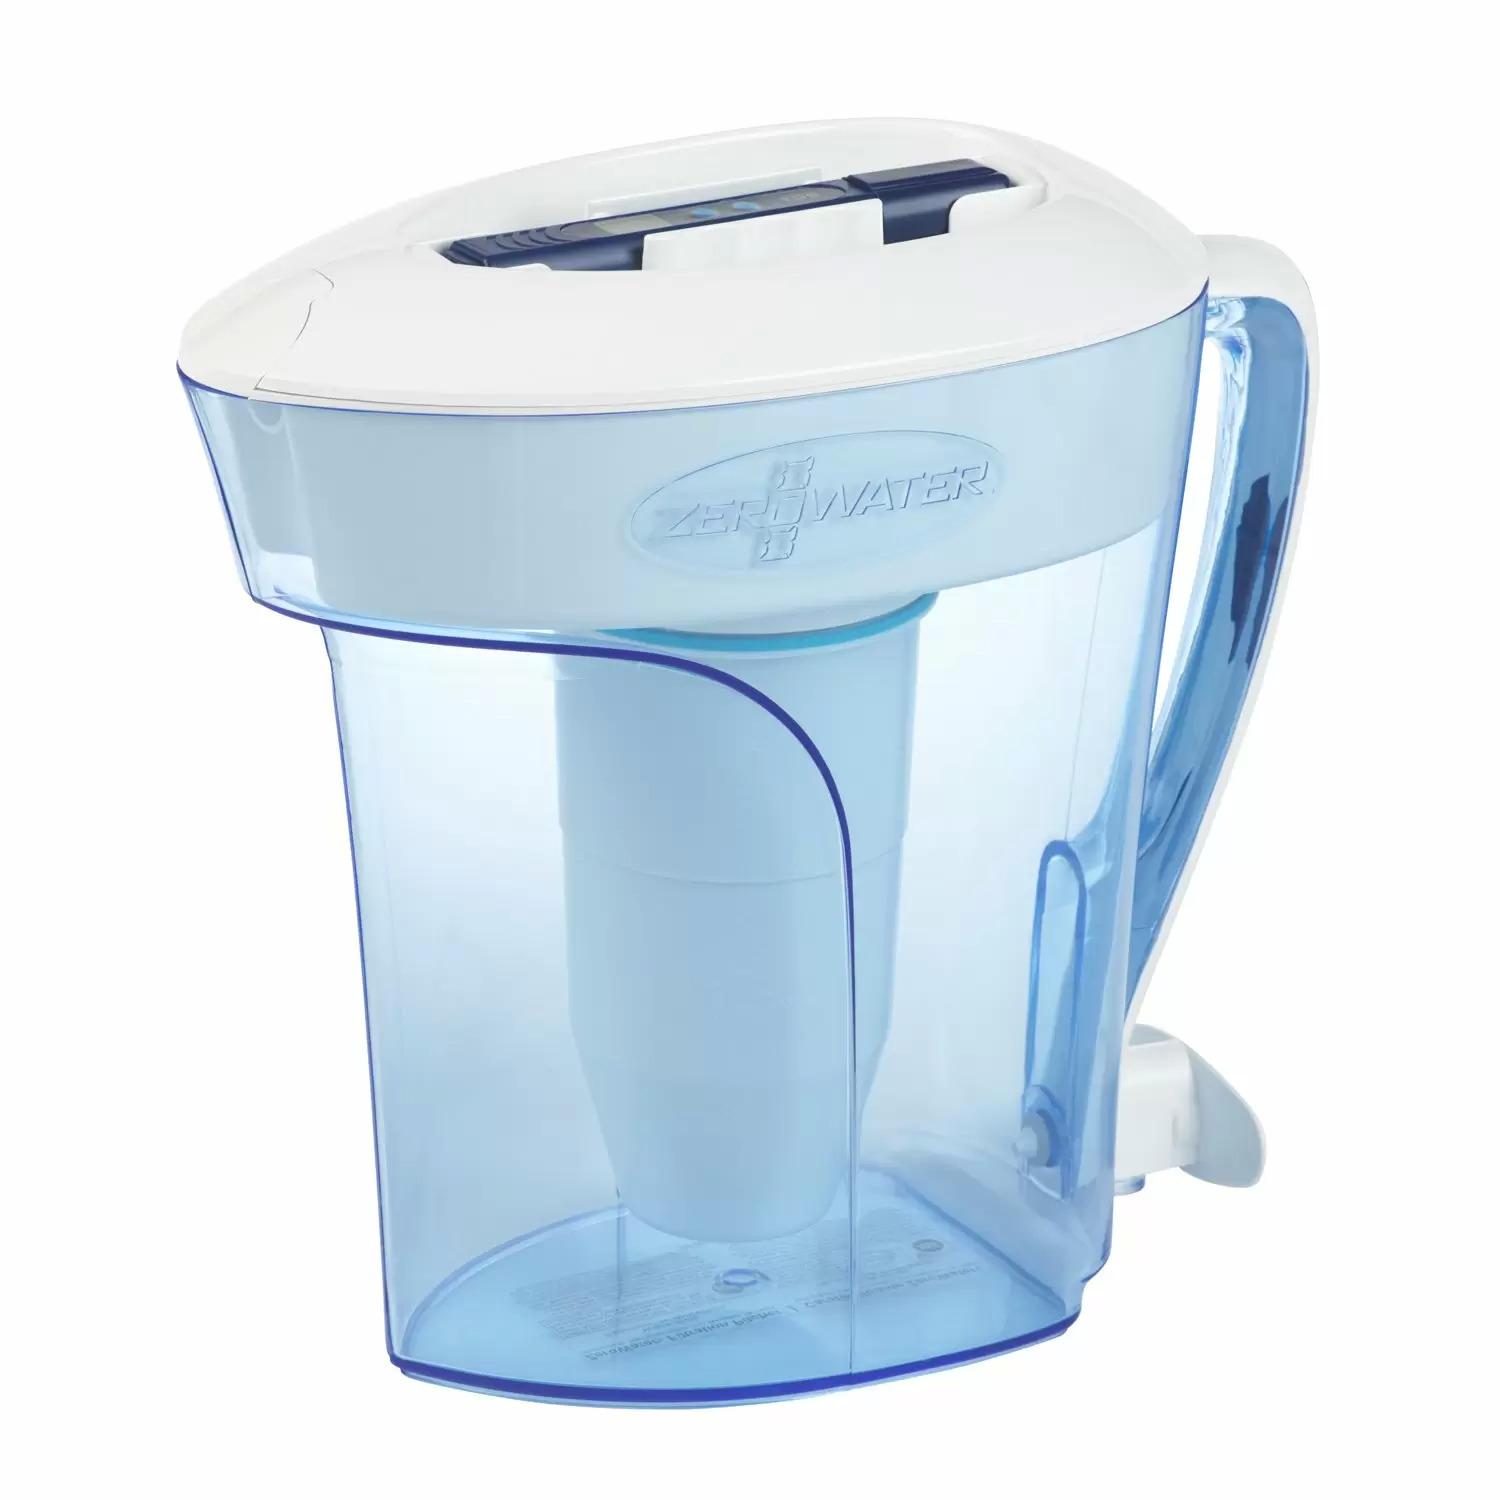 ZeroWater 7 Cup Ready-Pour Filtered Pour-Through Water Pitcher for $12.88